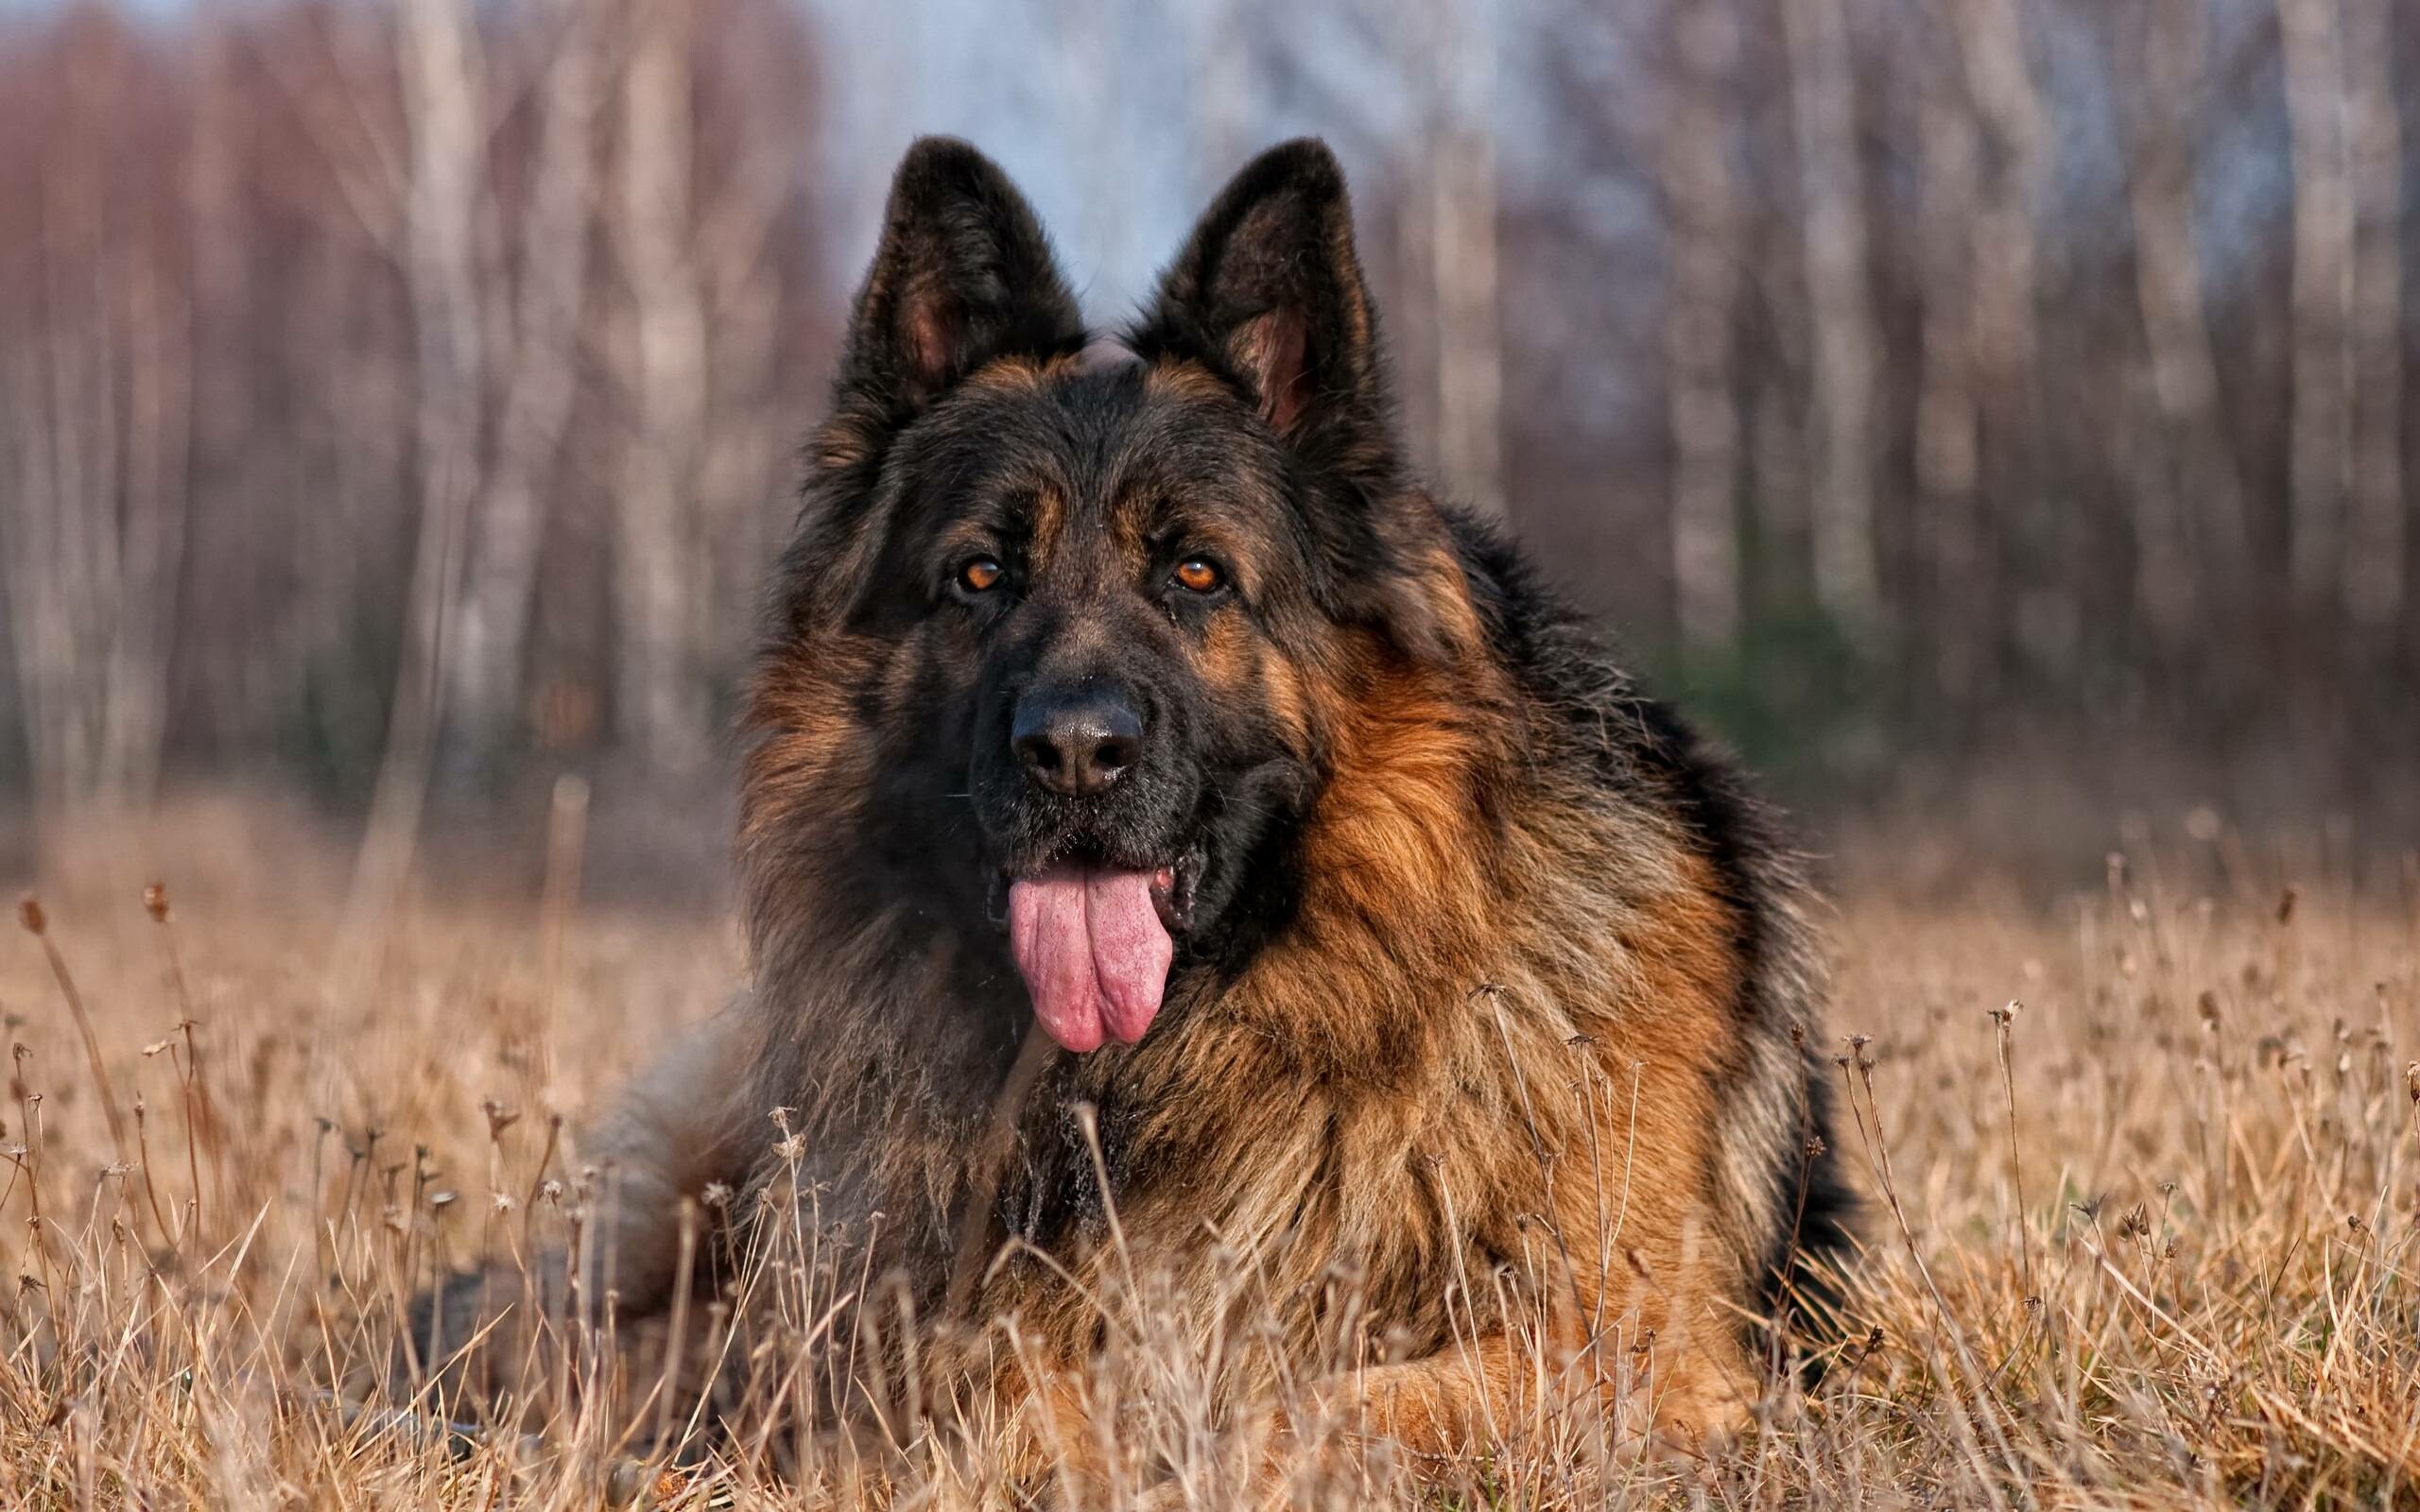 German Shepherd: Takes the second place in a list of breeds most likely to bark as watchdogs. 2560x1600 HD Background.